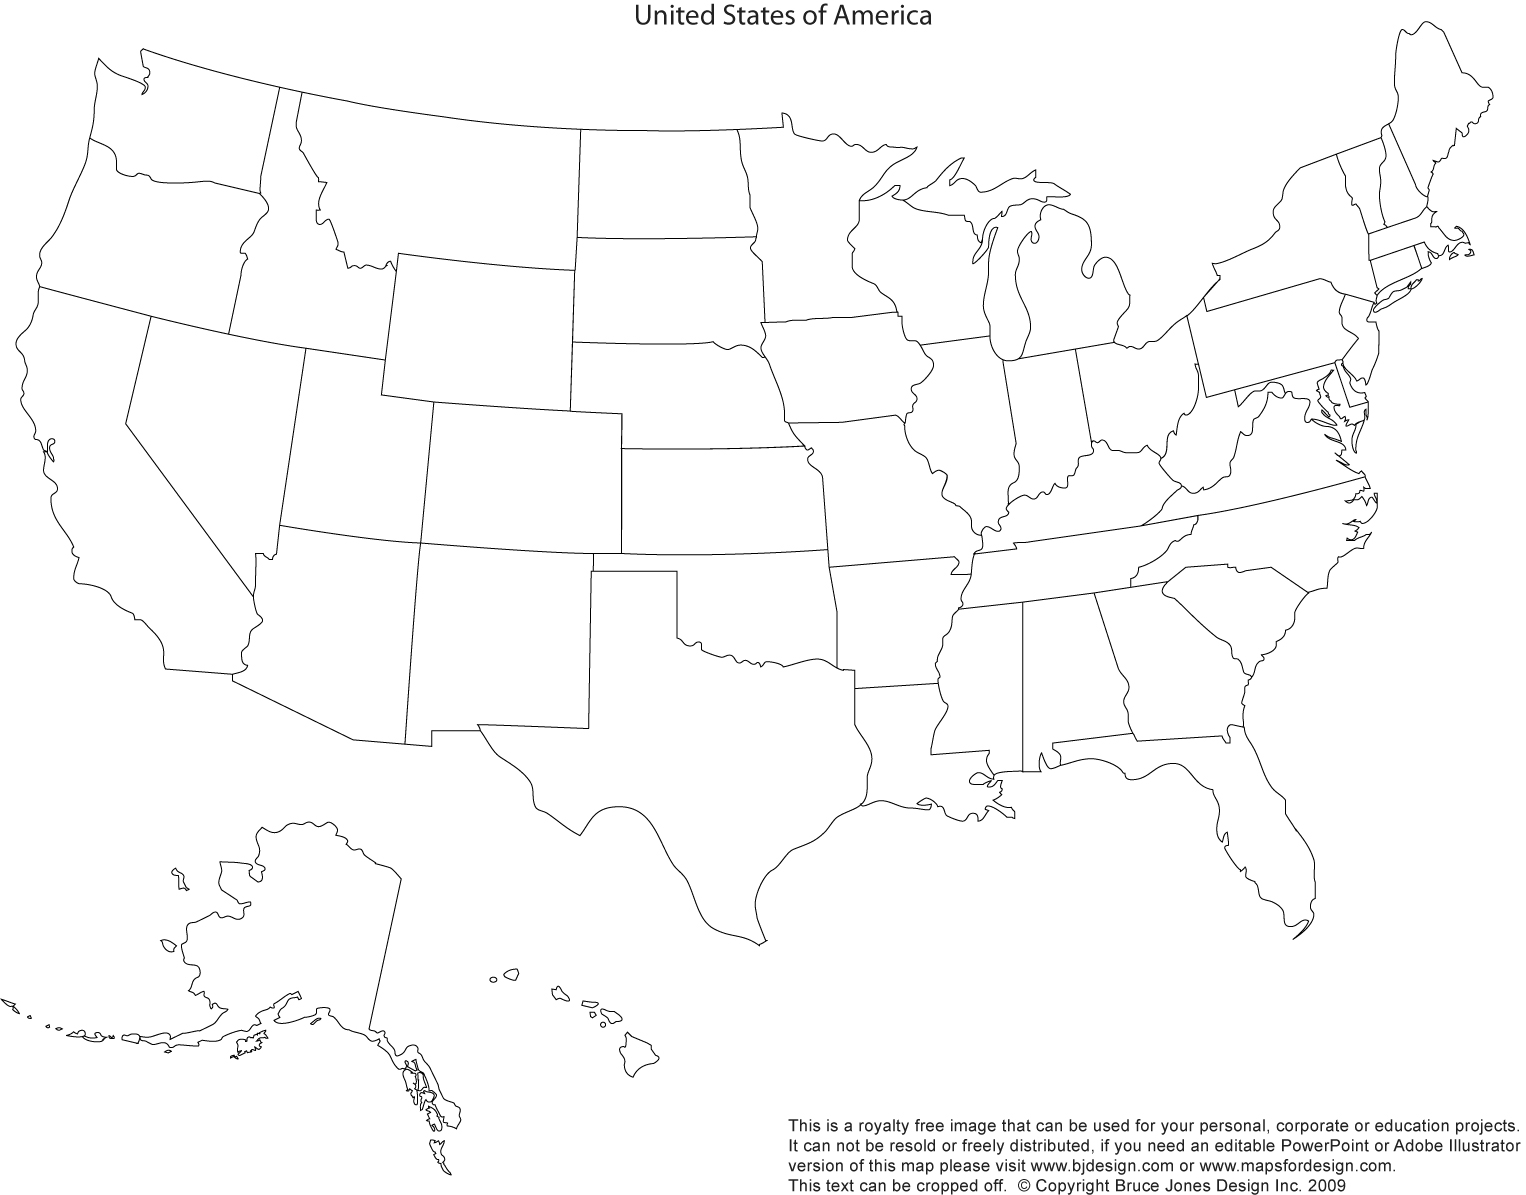 Blank state map of US for students to color in